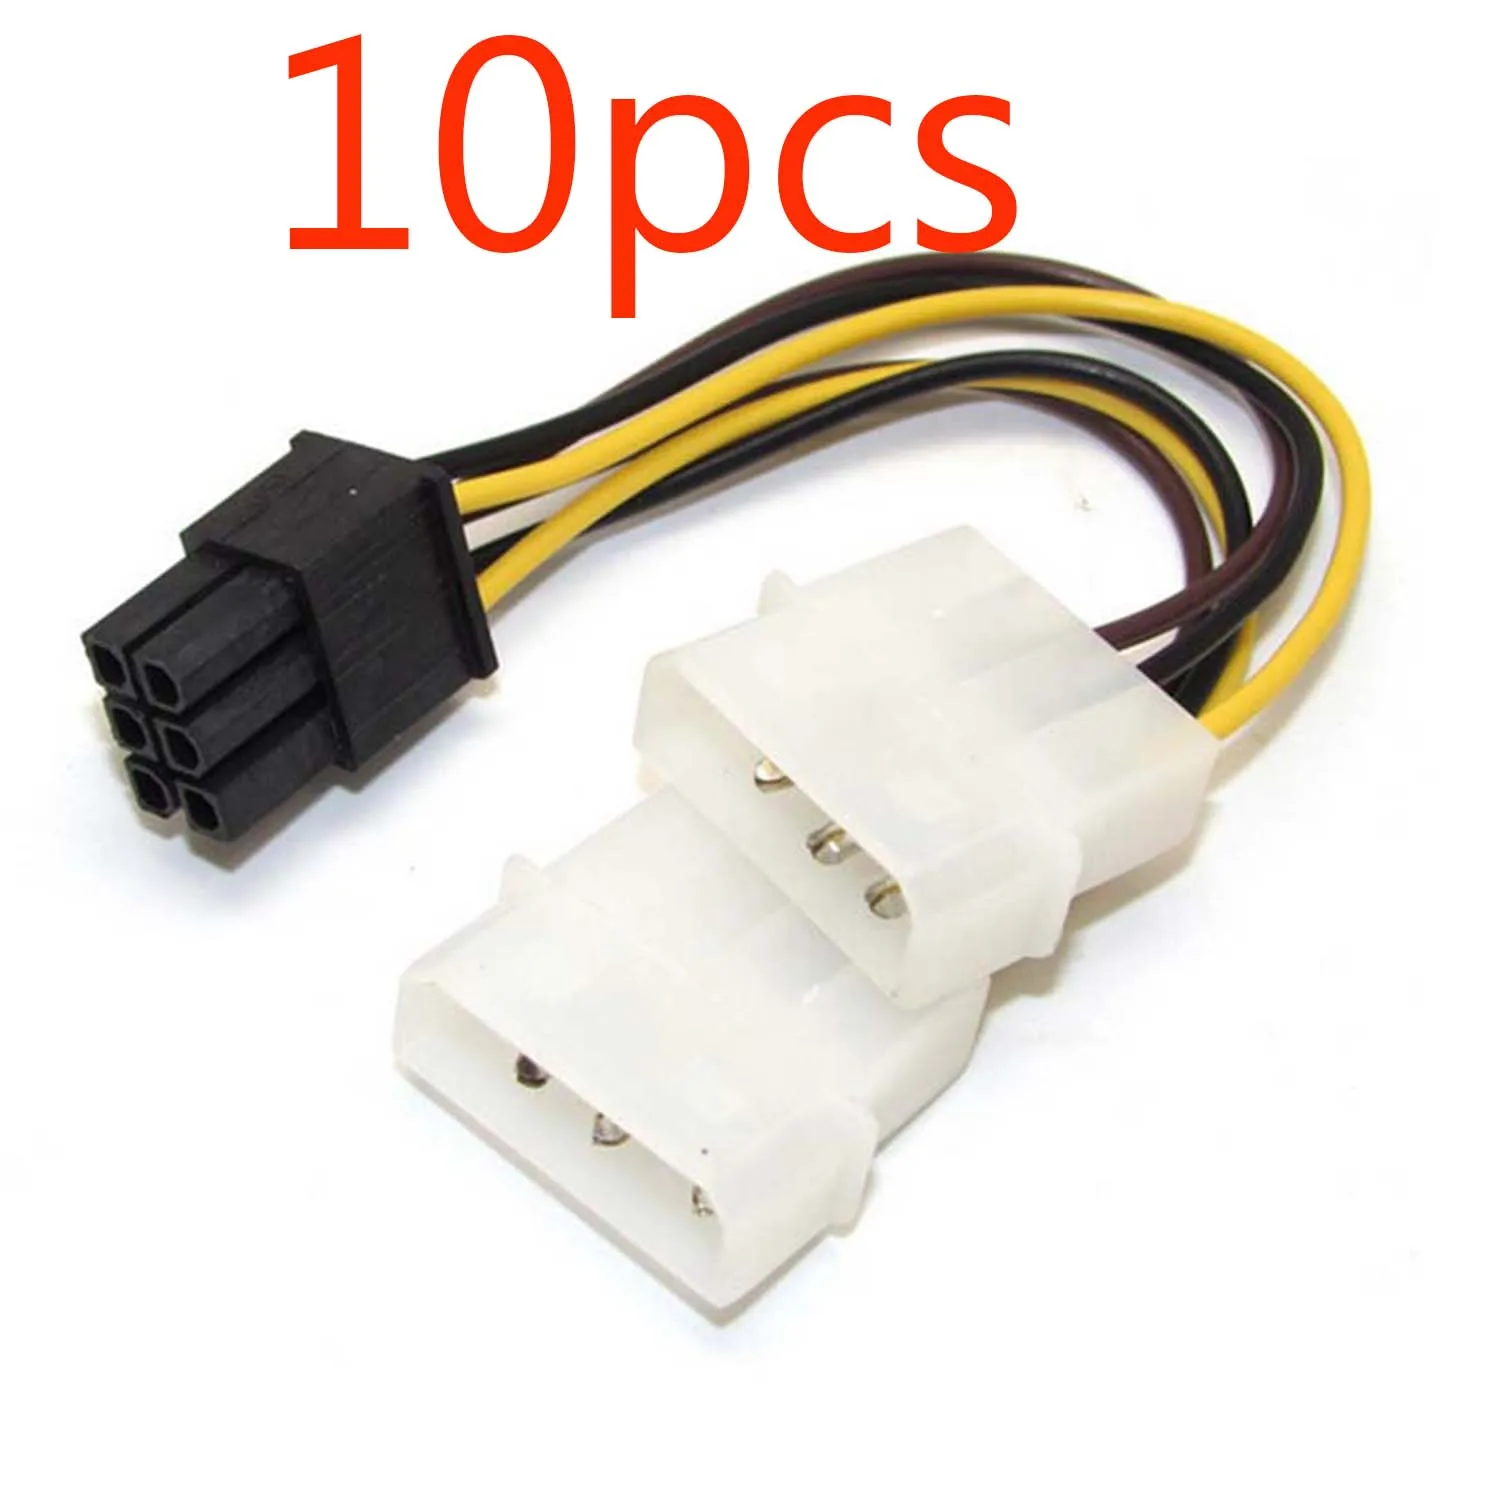 10pcs  2Dual 4 Pin Molex IDE to 6 Pin PCI-E Graphic Card Y Power Cable Adapter 